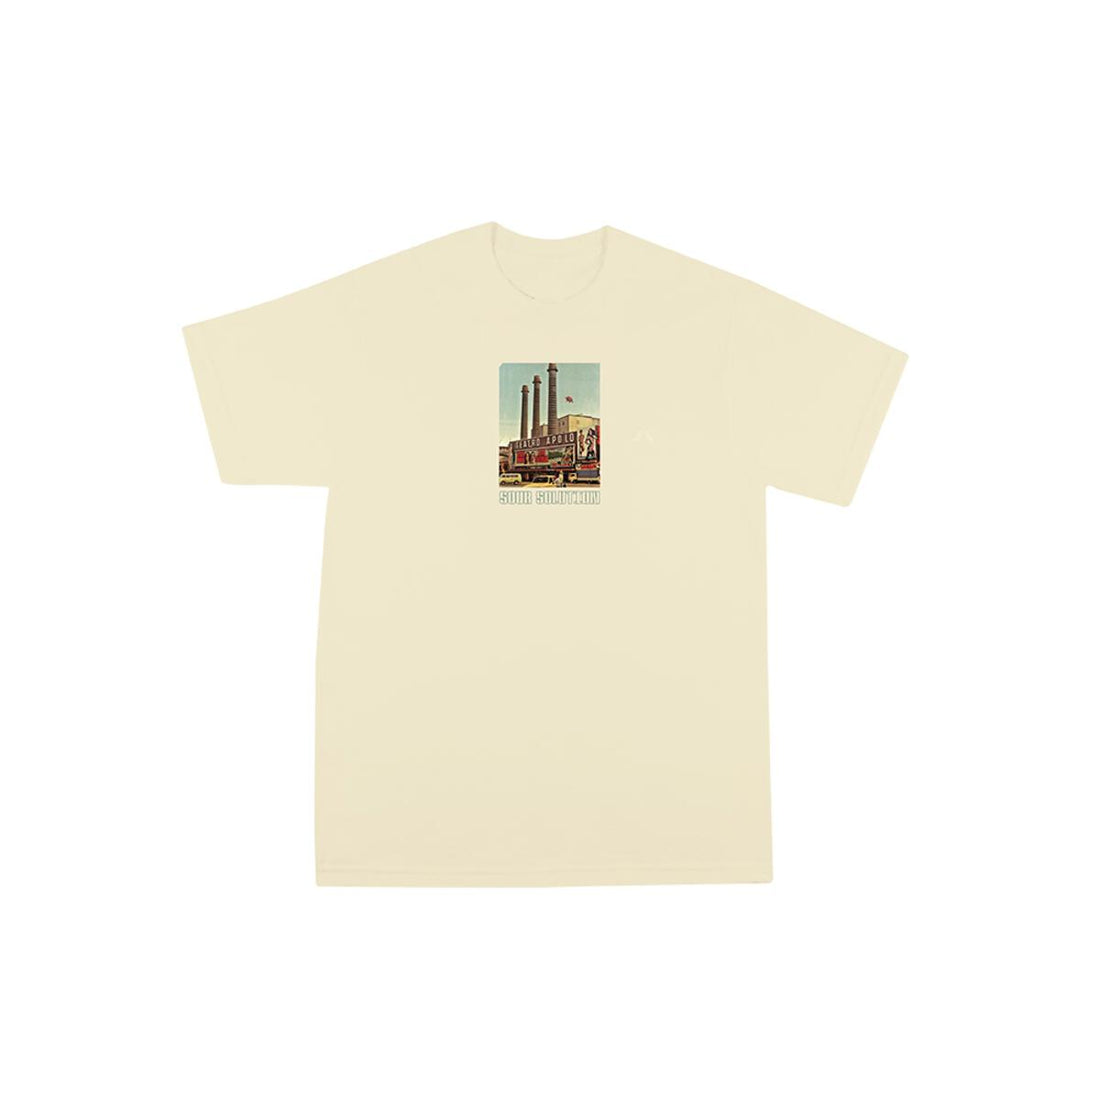 Sour Solutions Apolo T-Shirt (Natural)